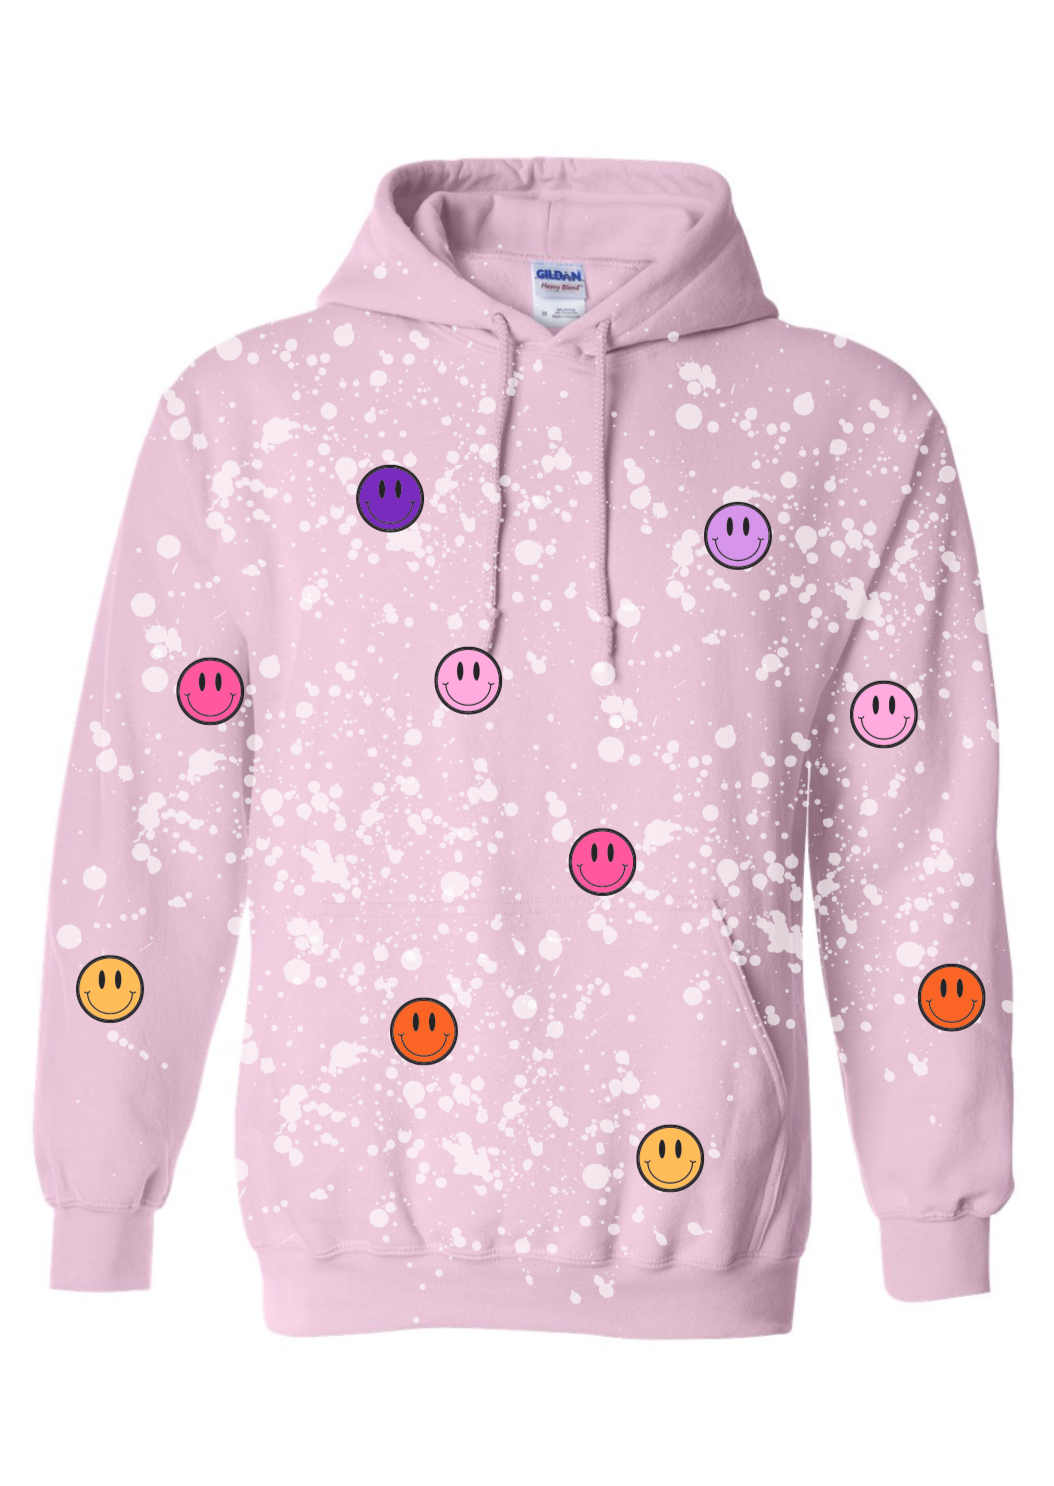 pink smiles all around hoodie